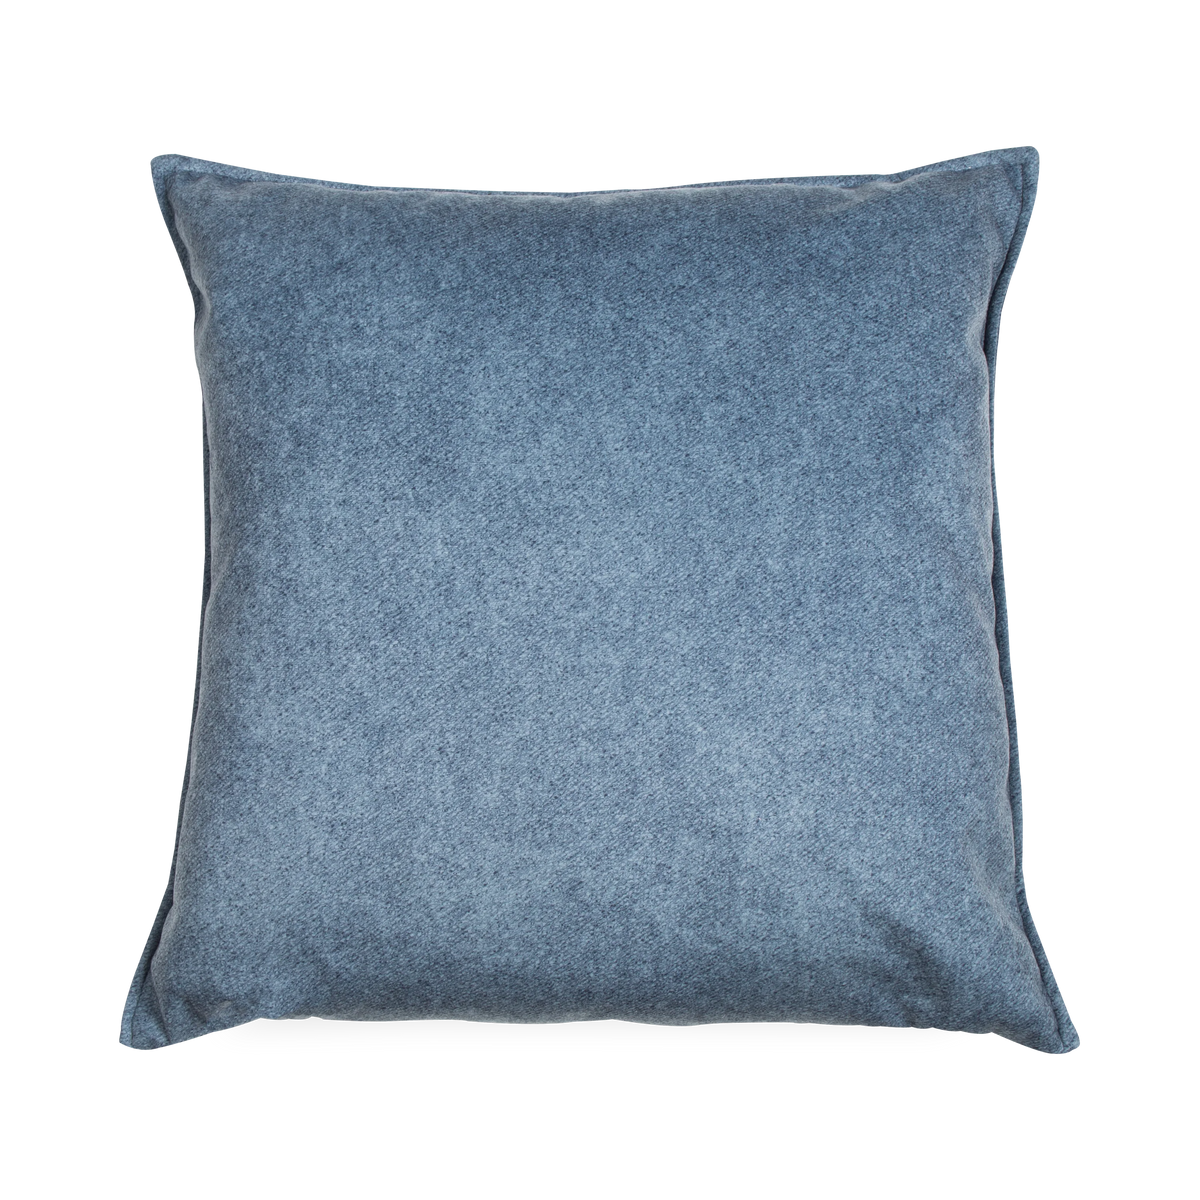 Elevating a classic design with a focus on textural appeal, the Scout Pillow has a lightly textured fabric that is perfect for enhancing your bedding or seating decor in a confiden